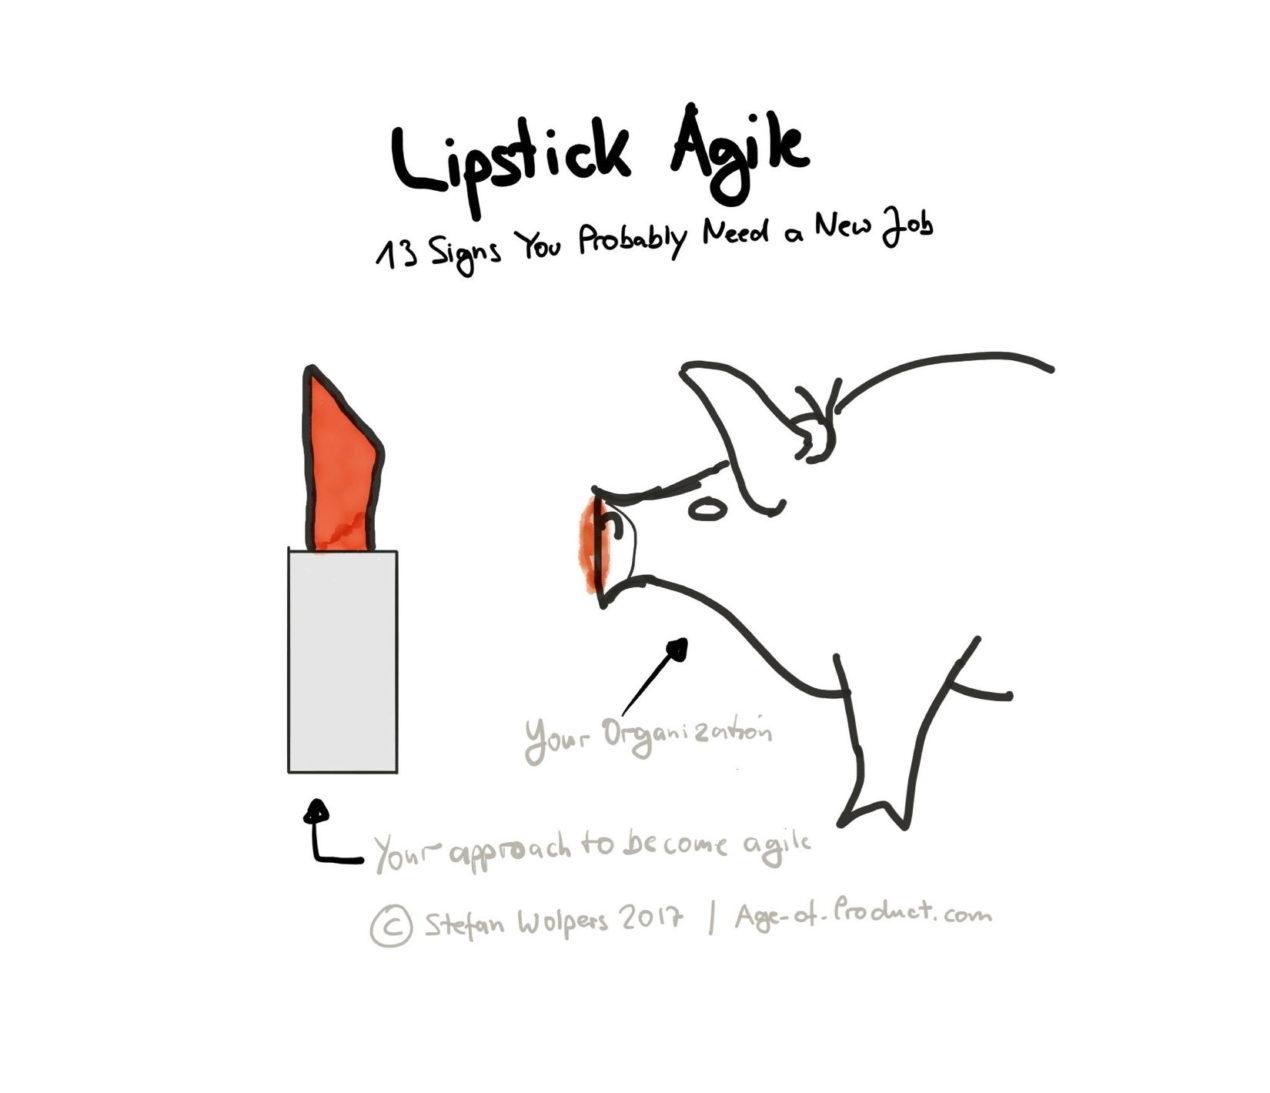 Lipstick Agile — 13 Signs You Probably Need a New Job